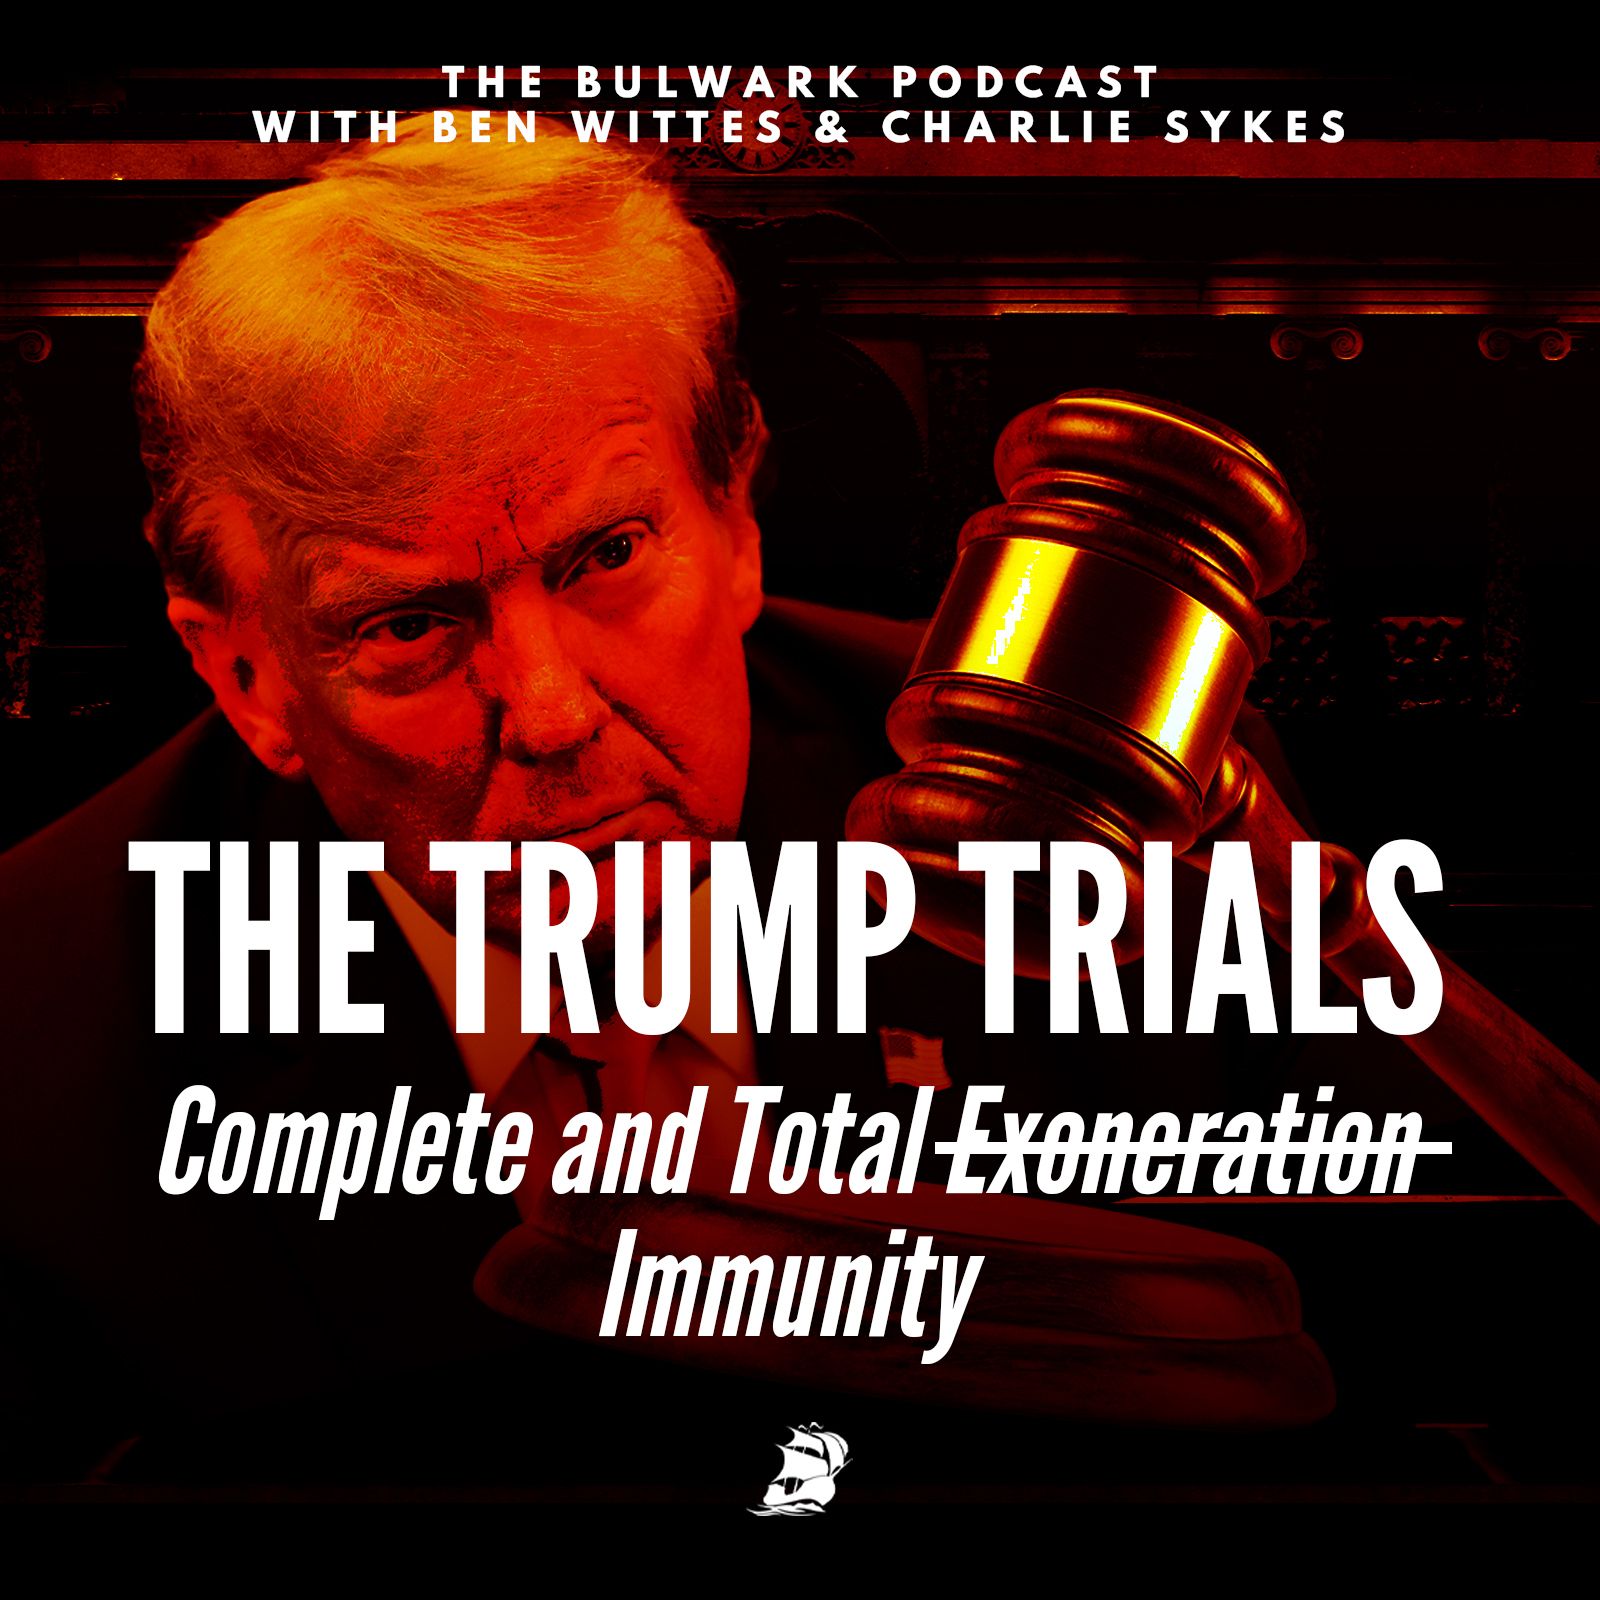 Complete and Total Immunity by The Bulwark Podcast